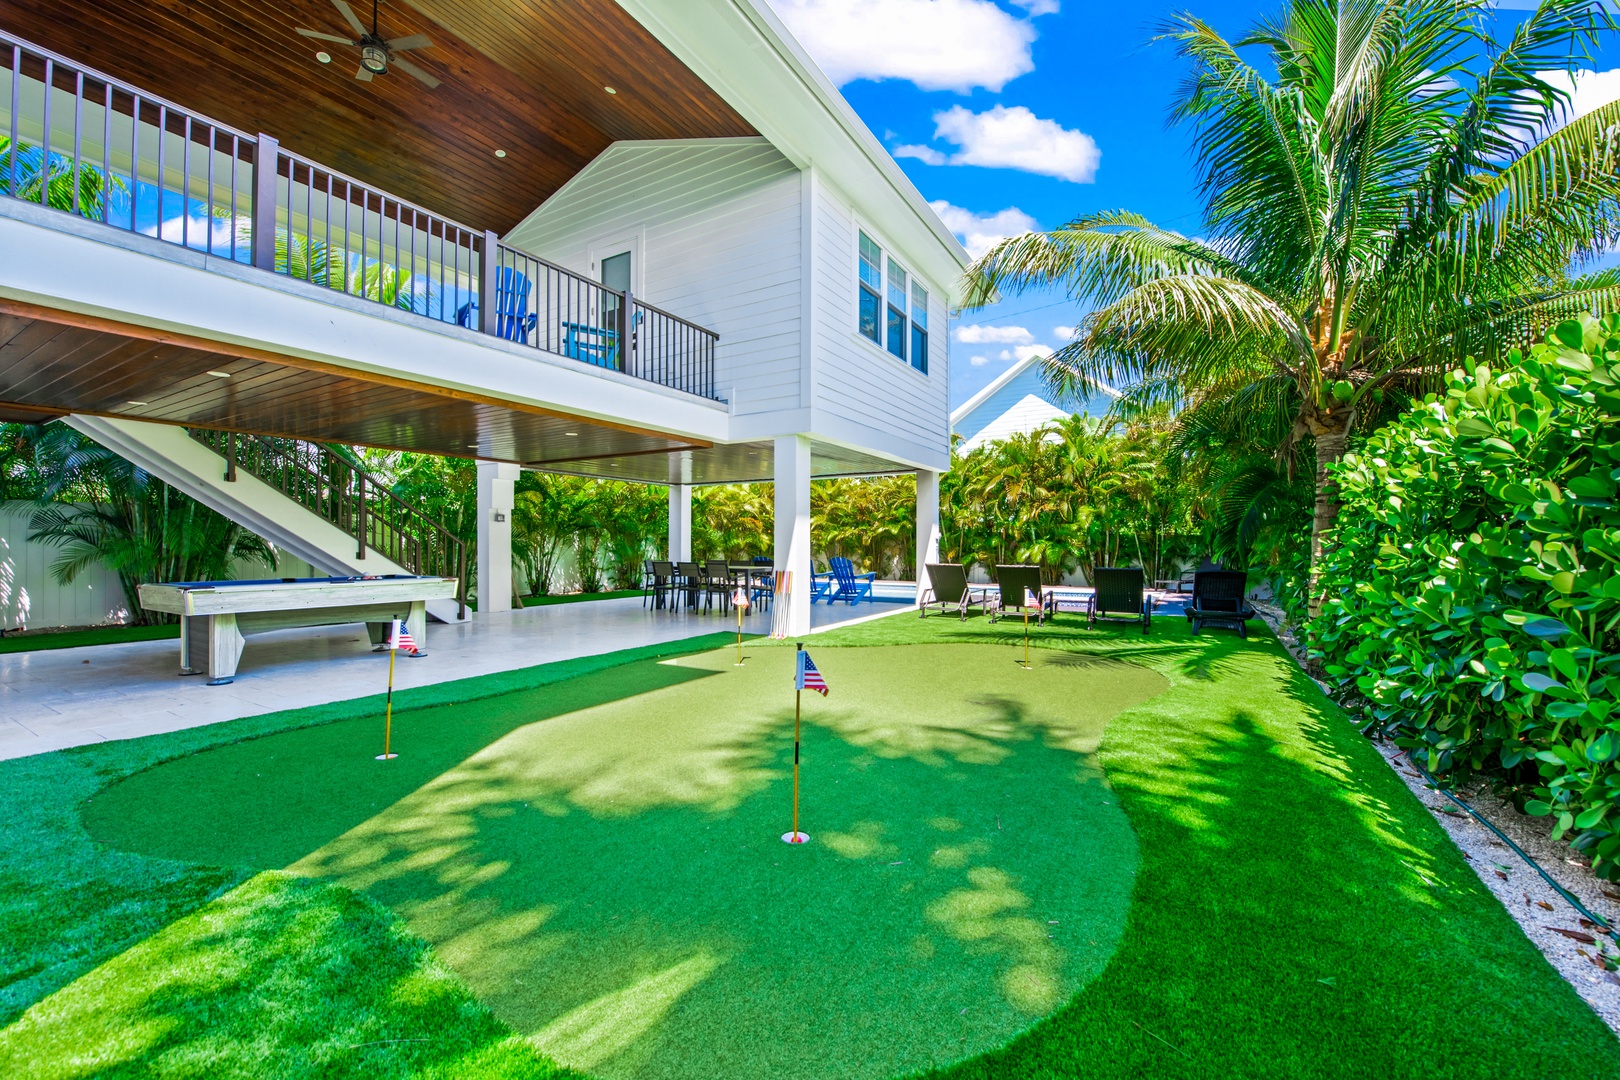 Private Backyard with Putting Green